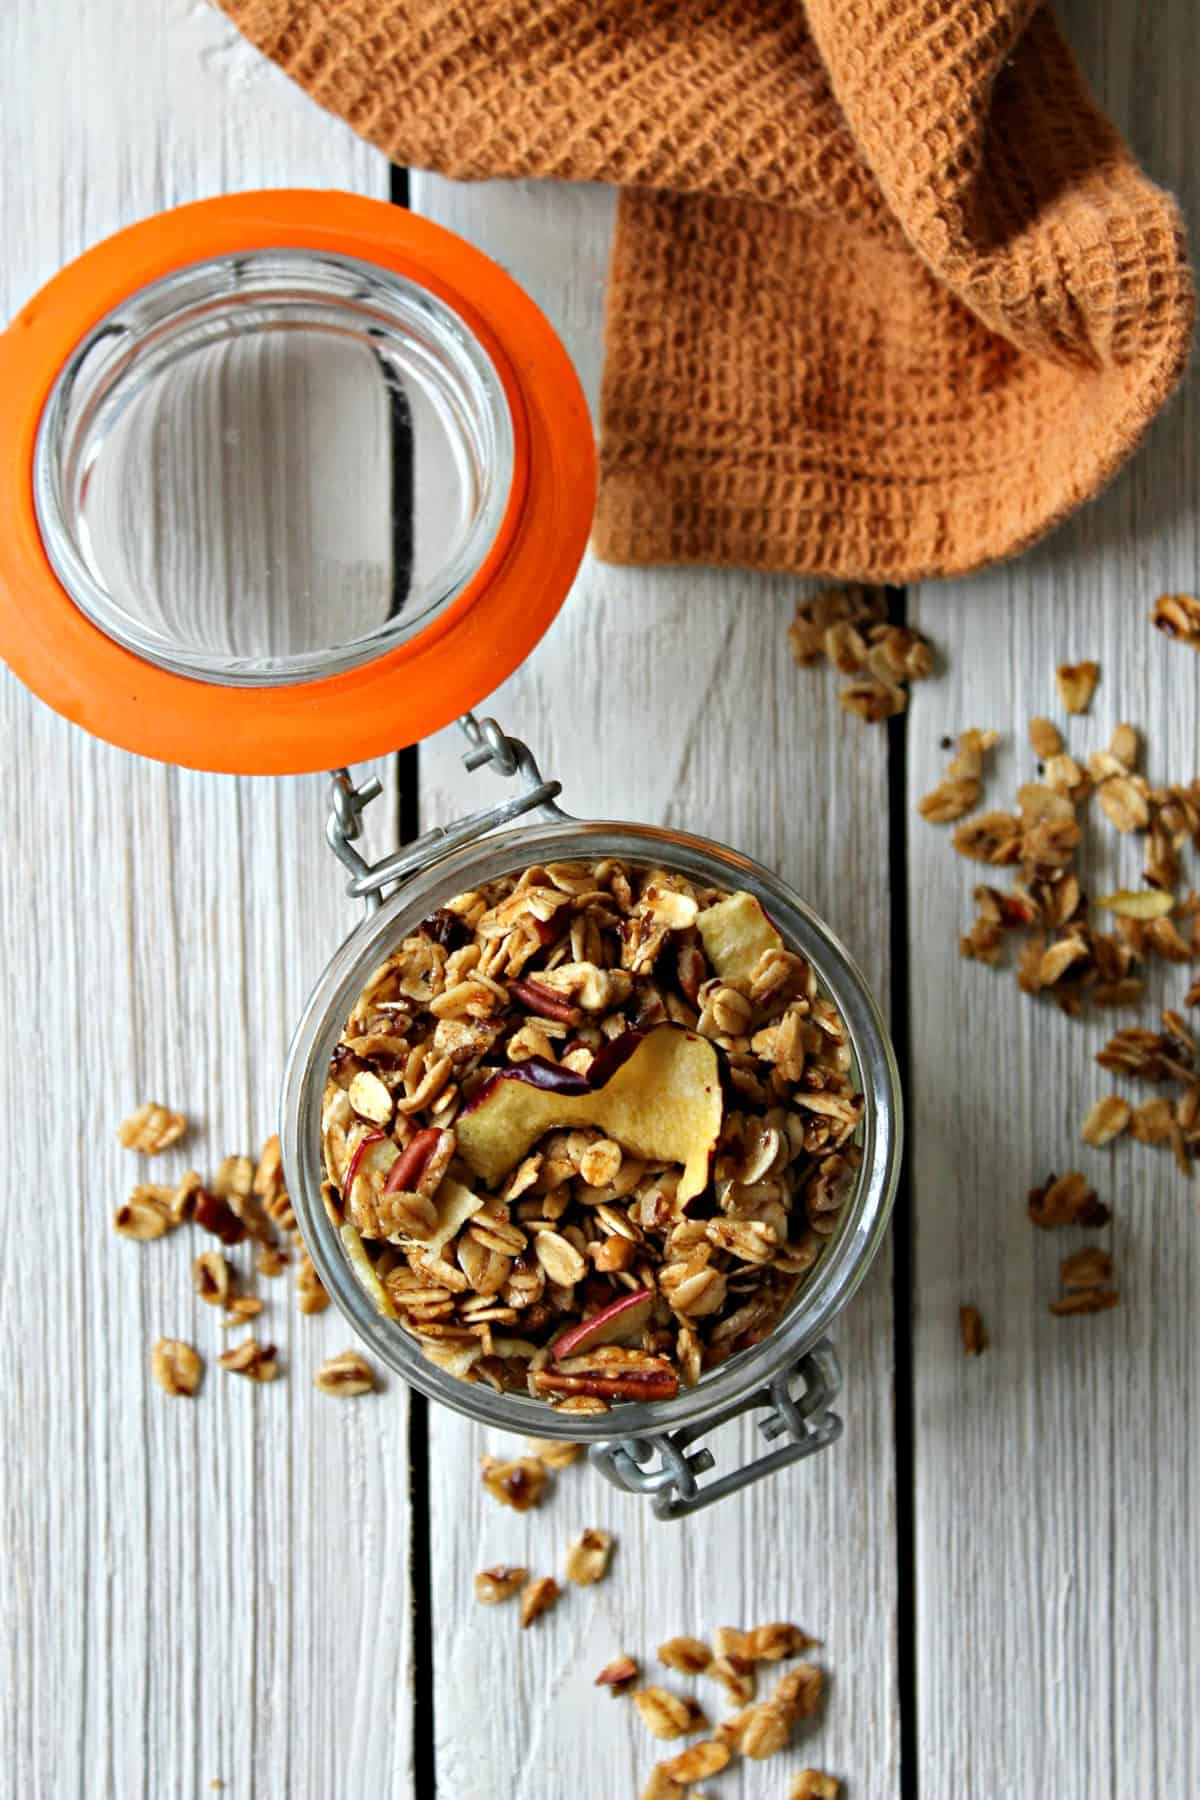 Warm spices, pecan bits and dried apple add a hint of seasonal flavor that will quickly make this Spiced Apple Pecan Granola your preferred fall snack!